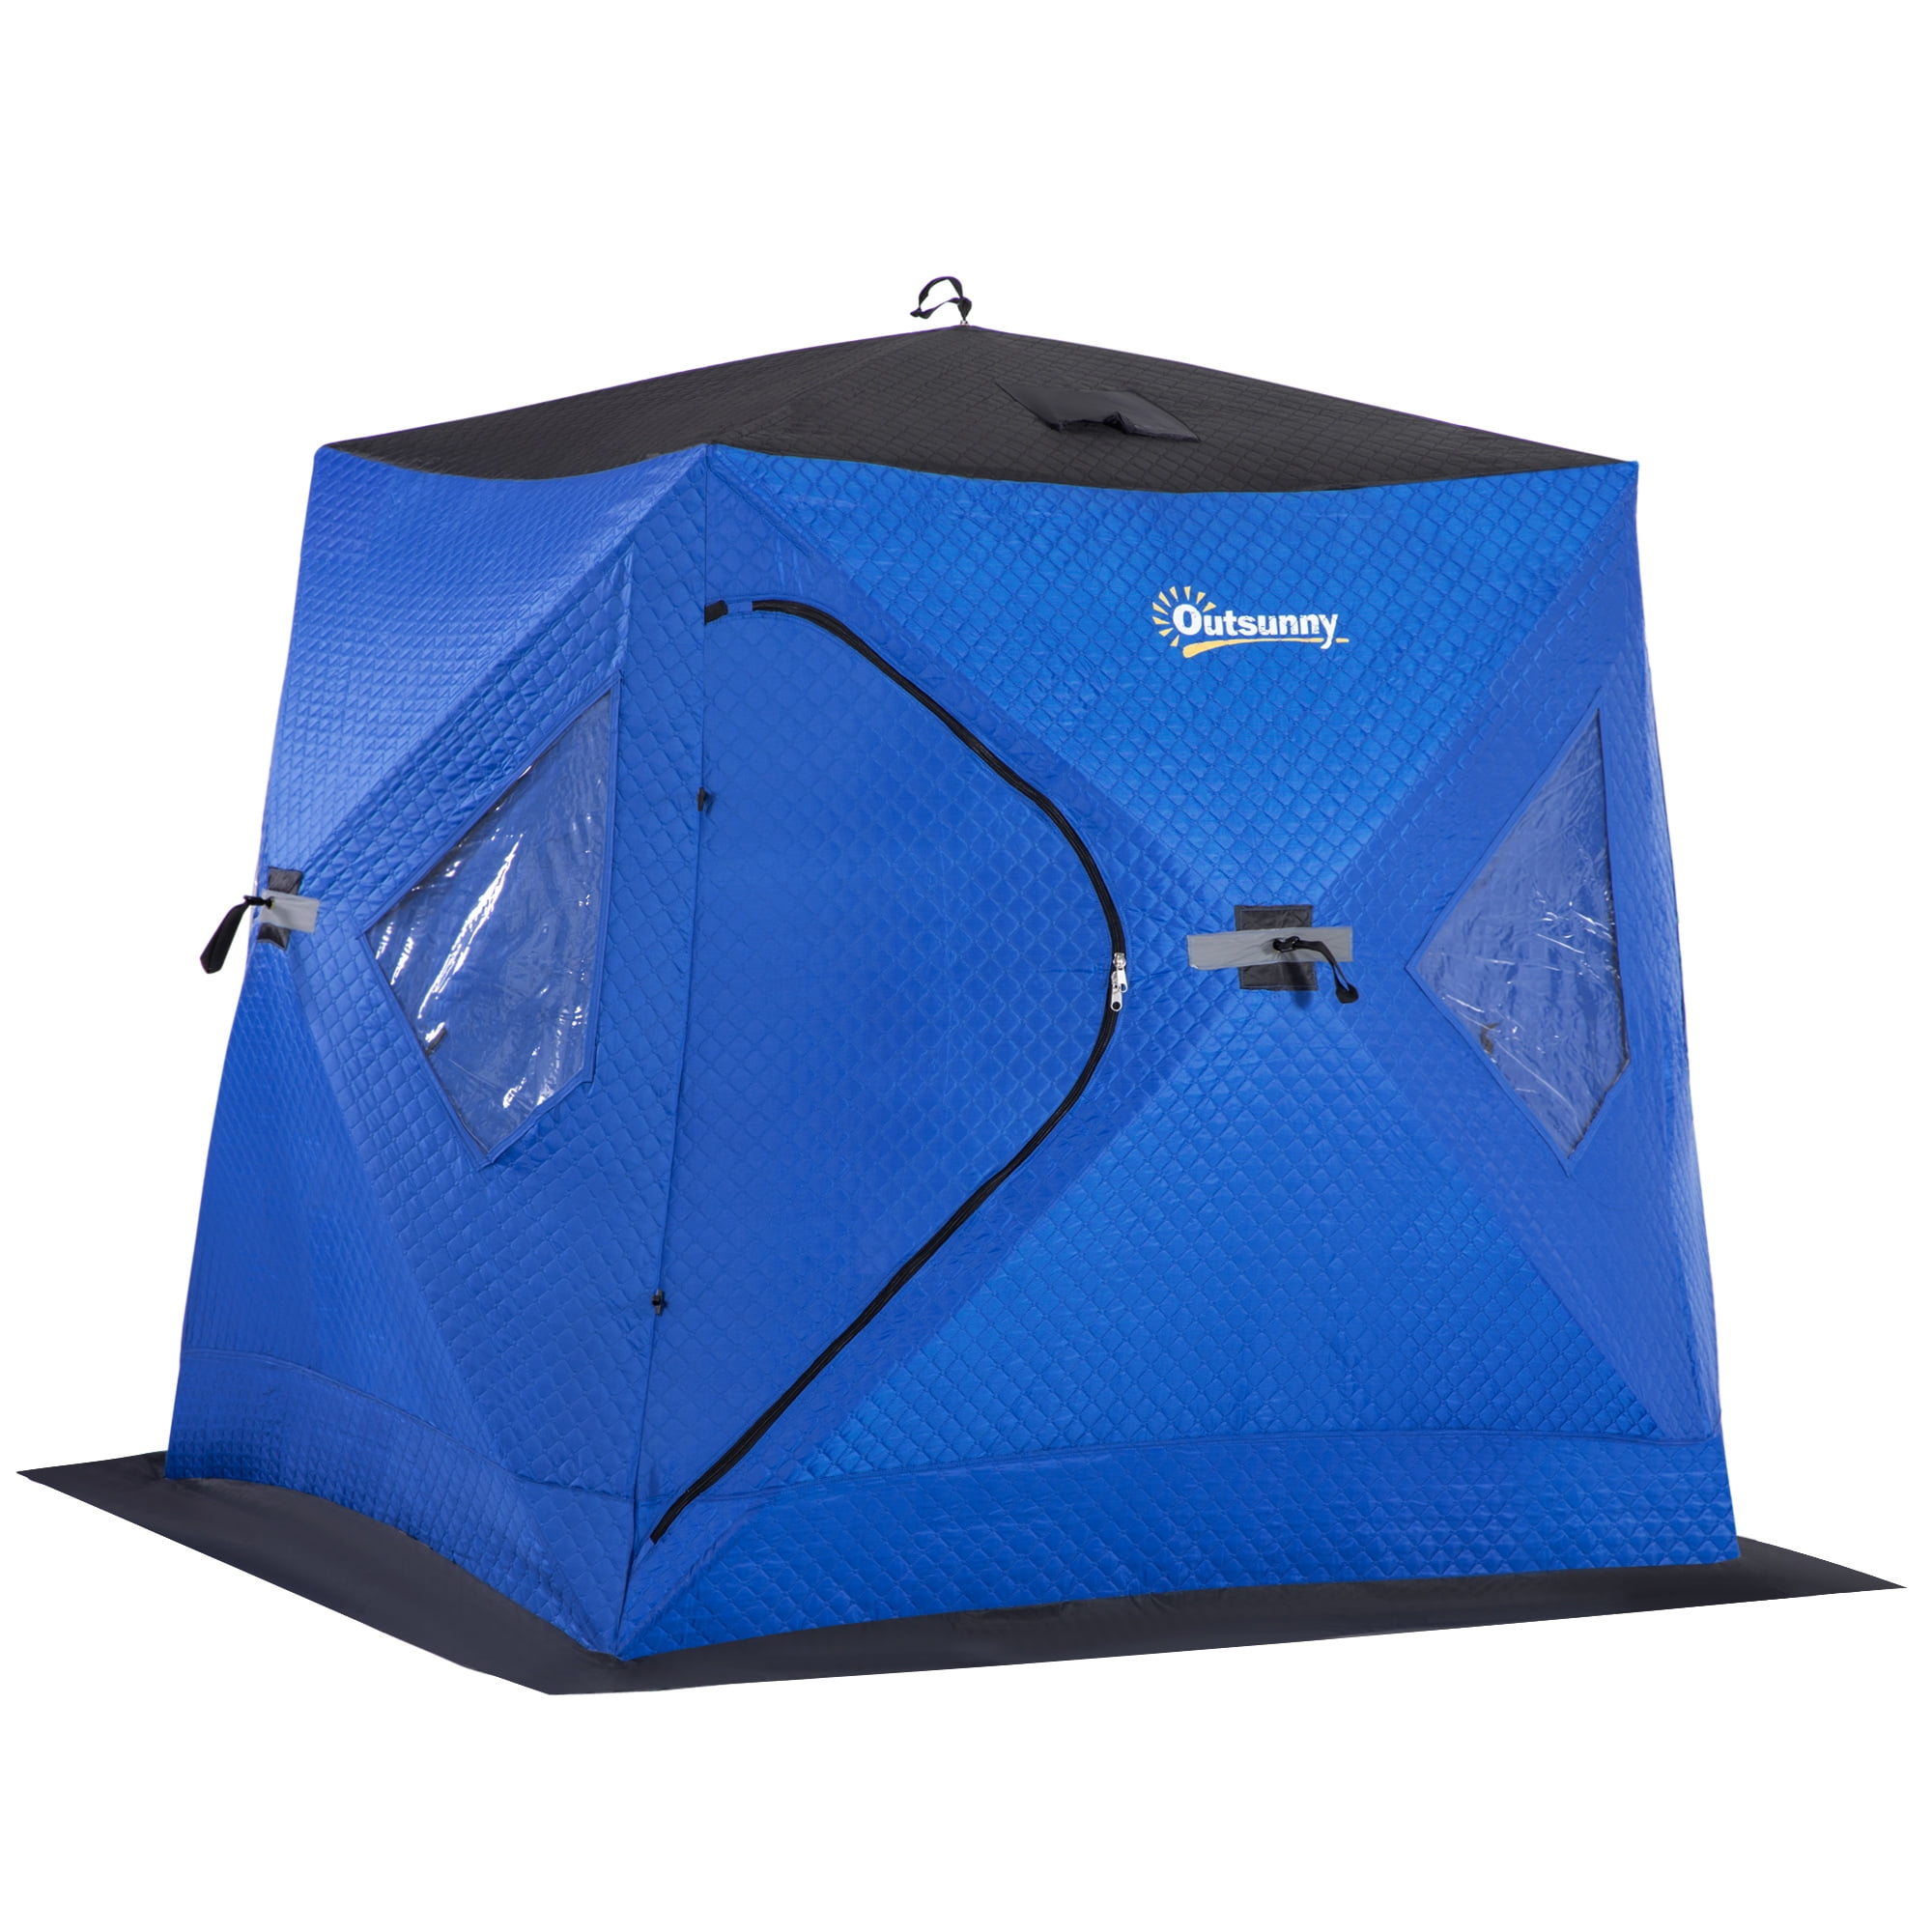 Outsunny 2 Man Insulated Pop Up Ice Fishing Tent, Blue